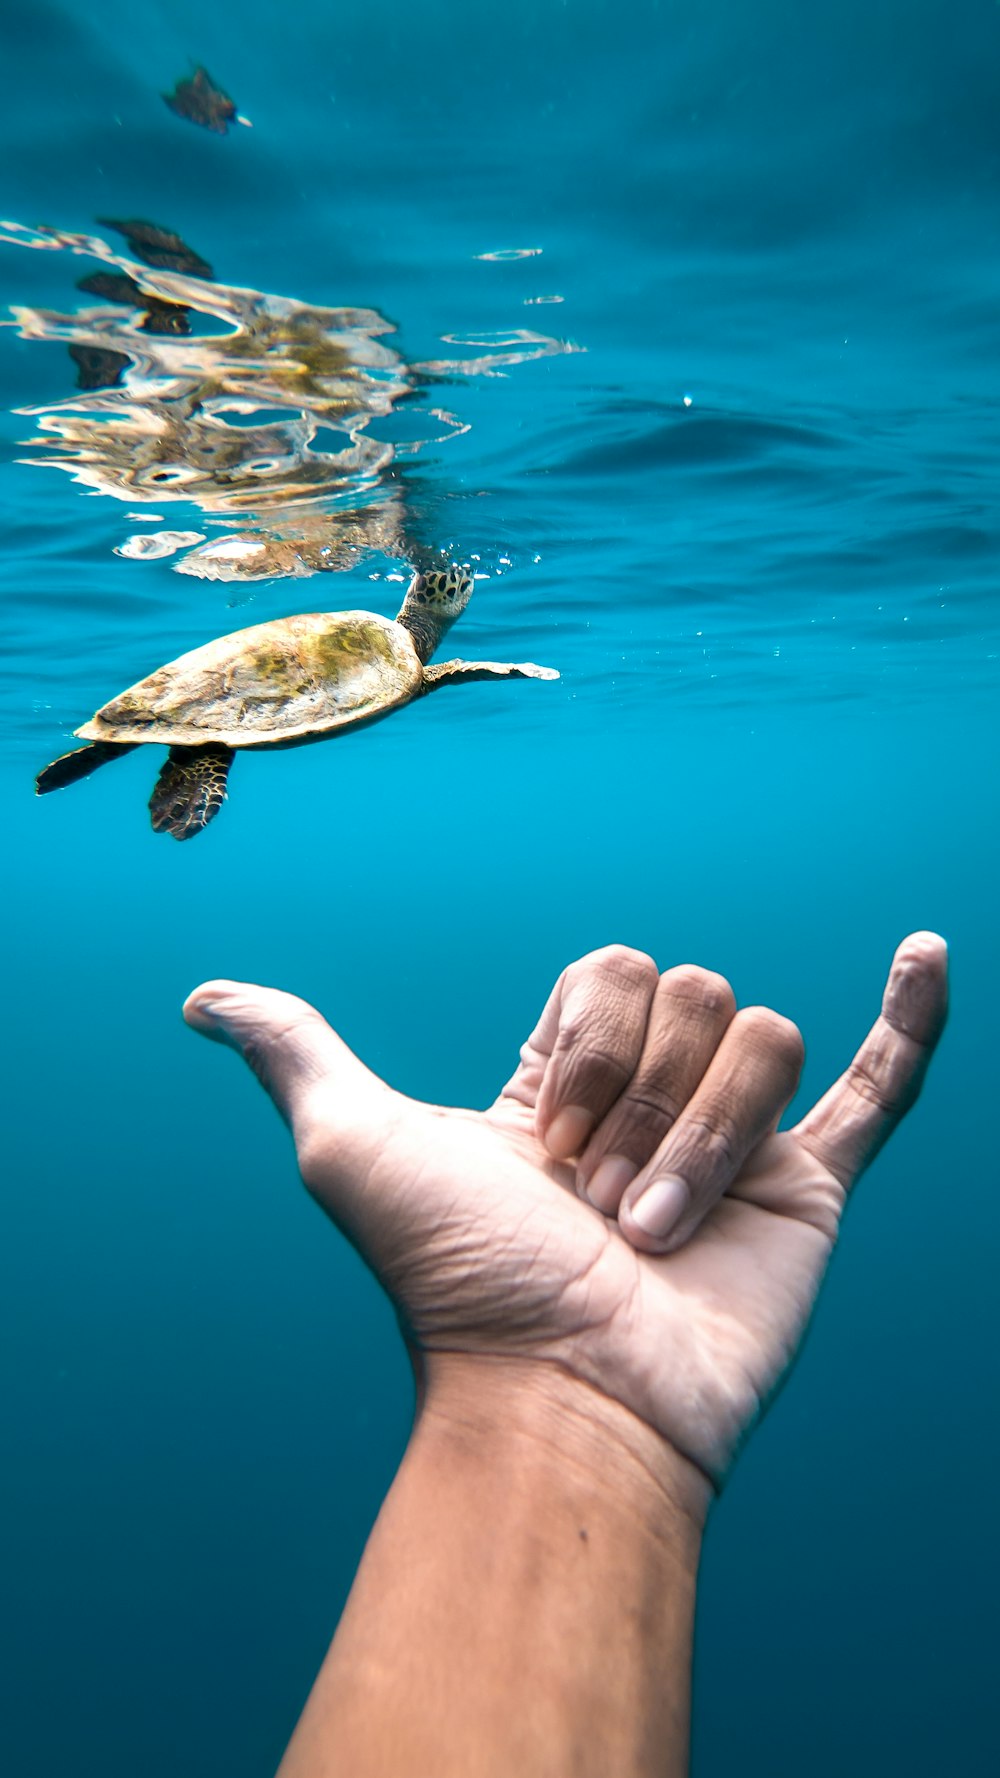 brown and gray turtle near hand